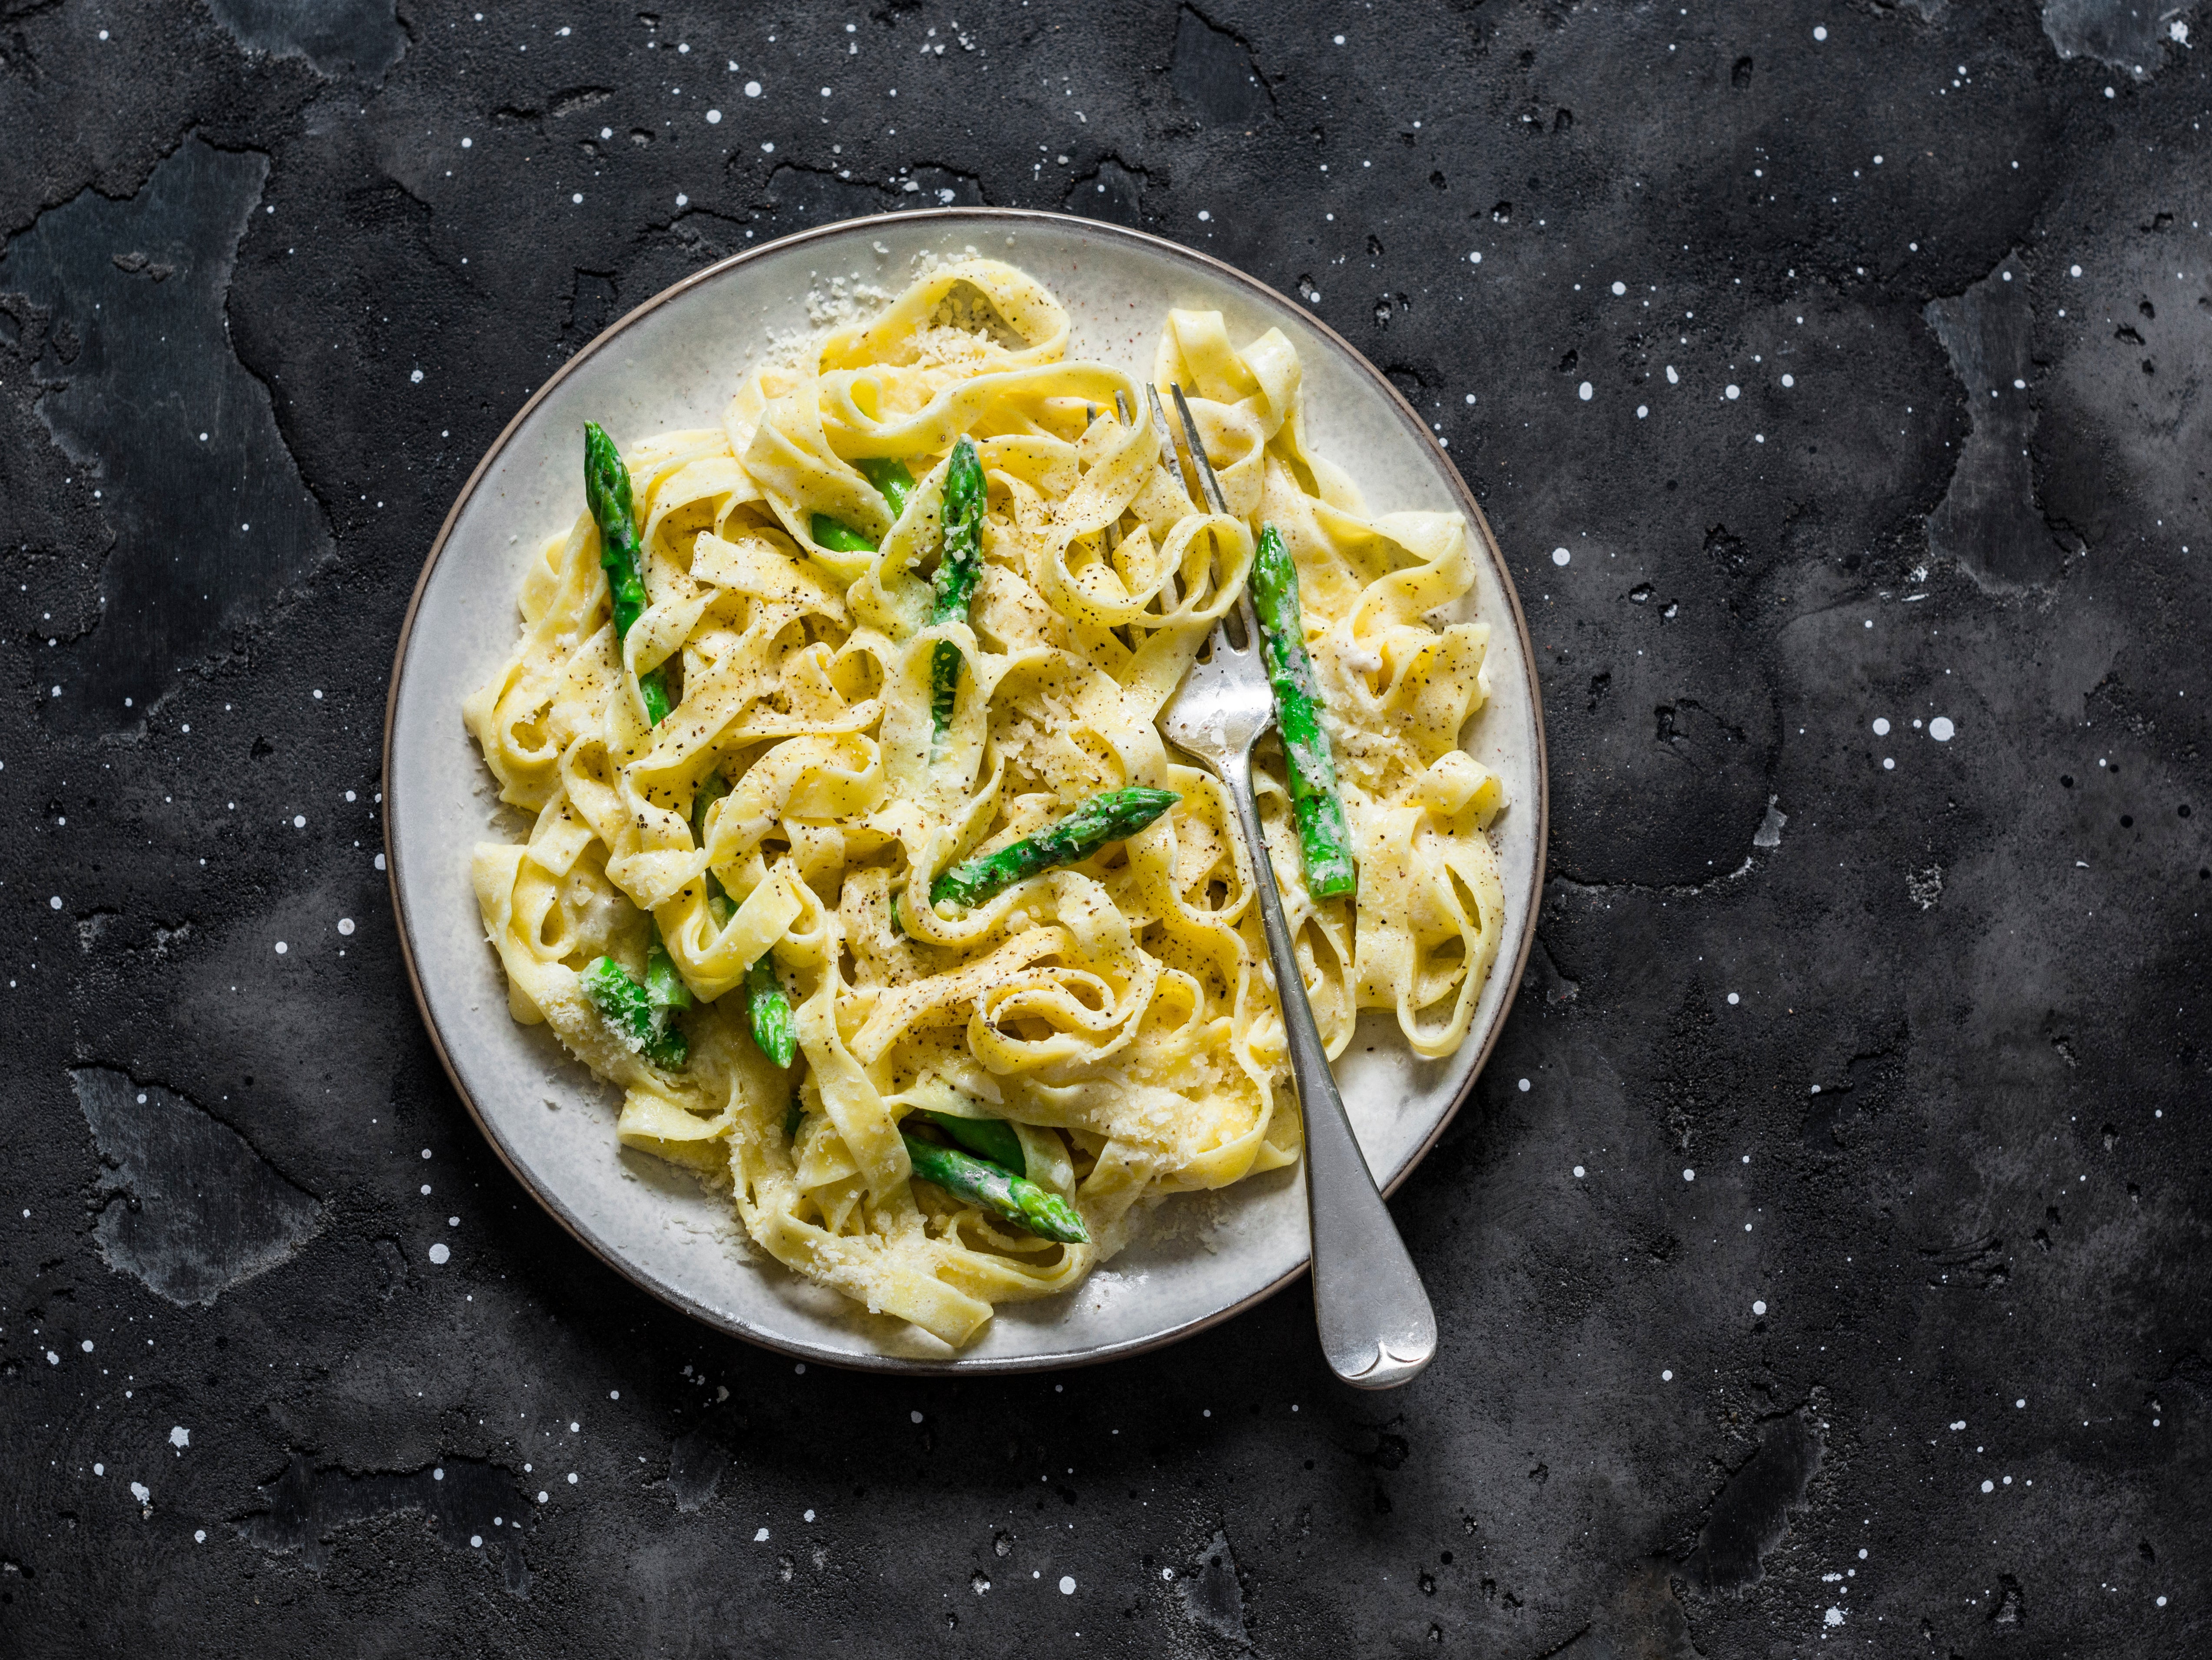 Asparagus, a particularly umami-rich vegetable, is just perfect with the pasta by itself